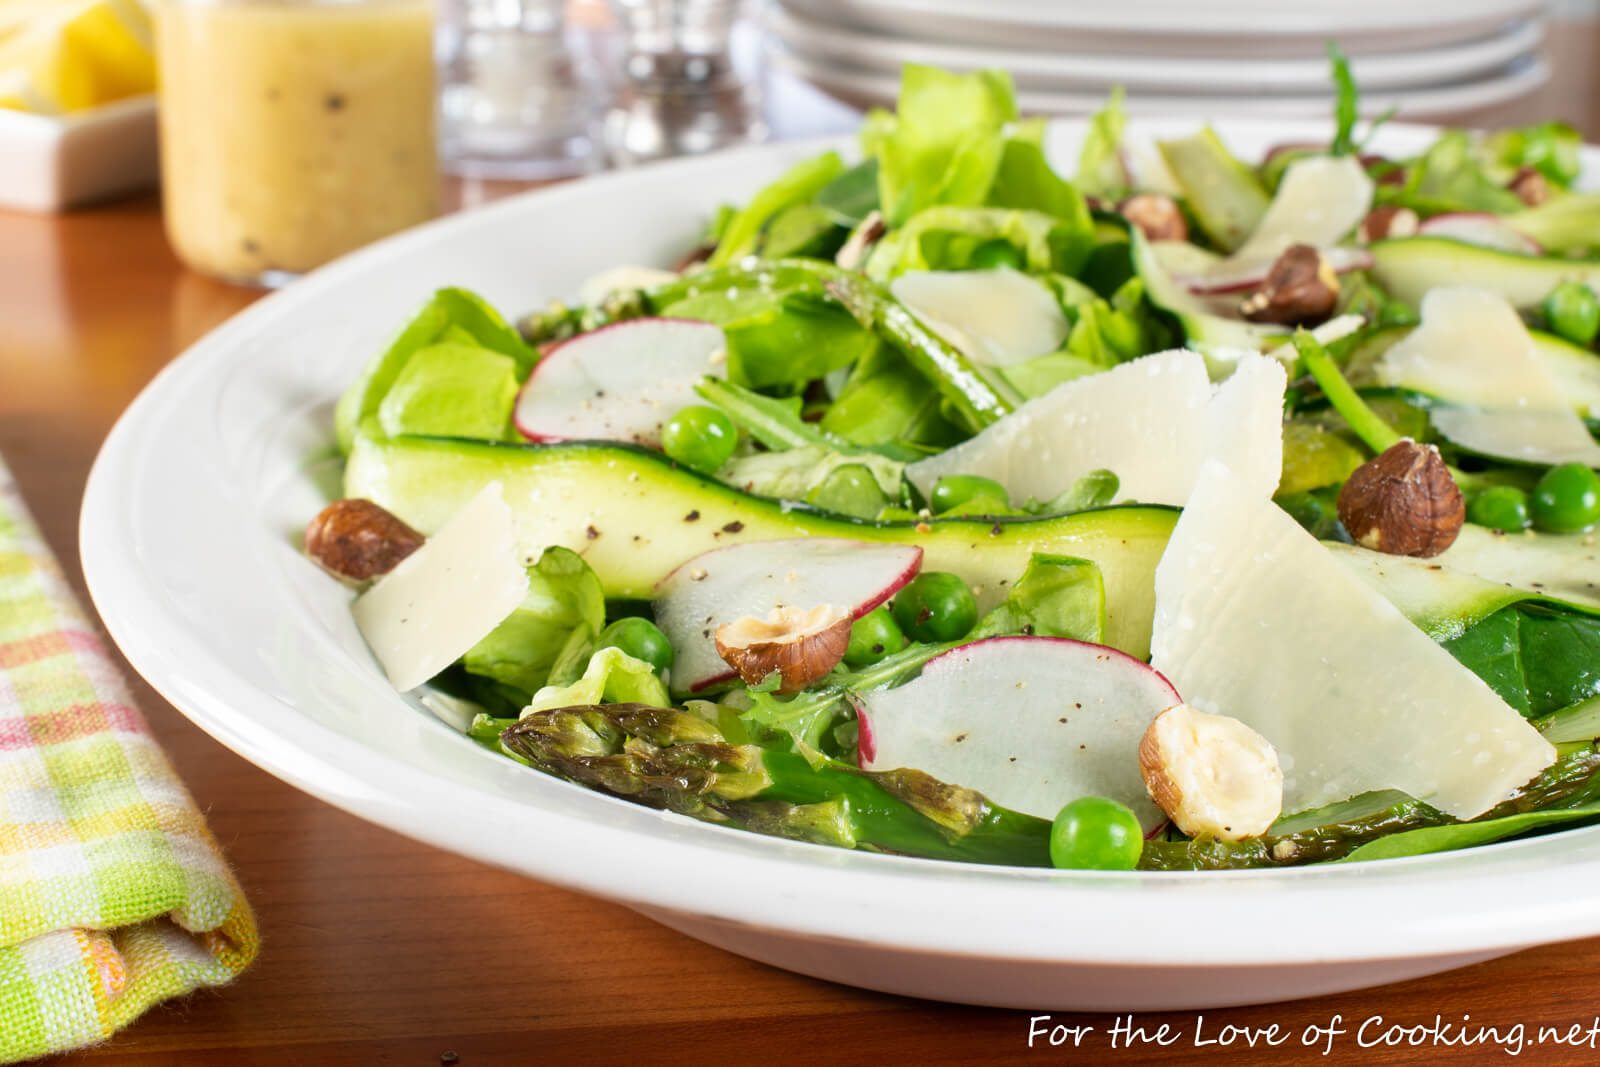 Spring Salad with Asparagus, Zucchini, and Hazelnuts with a Lemon Vinaigrette